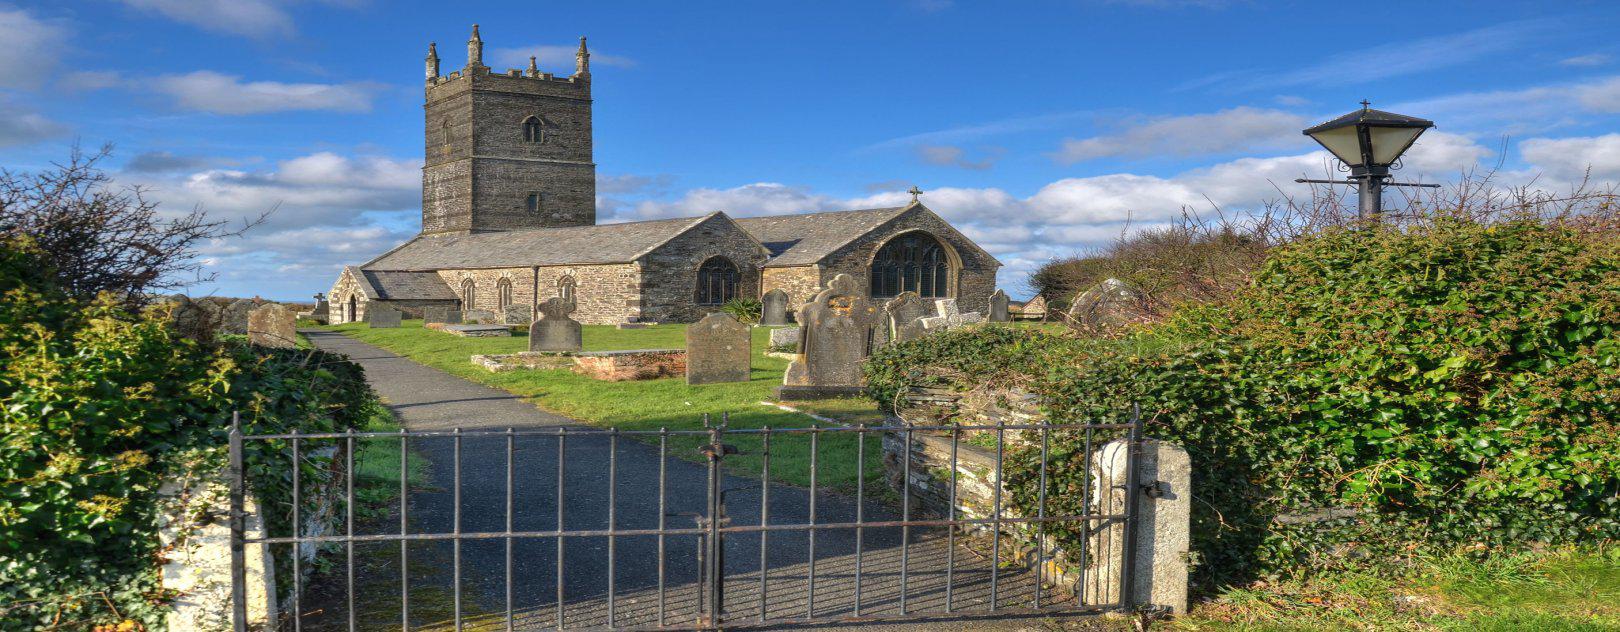 Another View of St Eval Parish Church